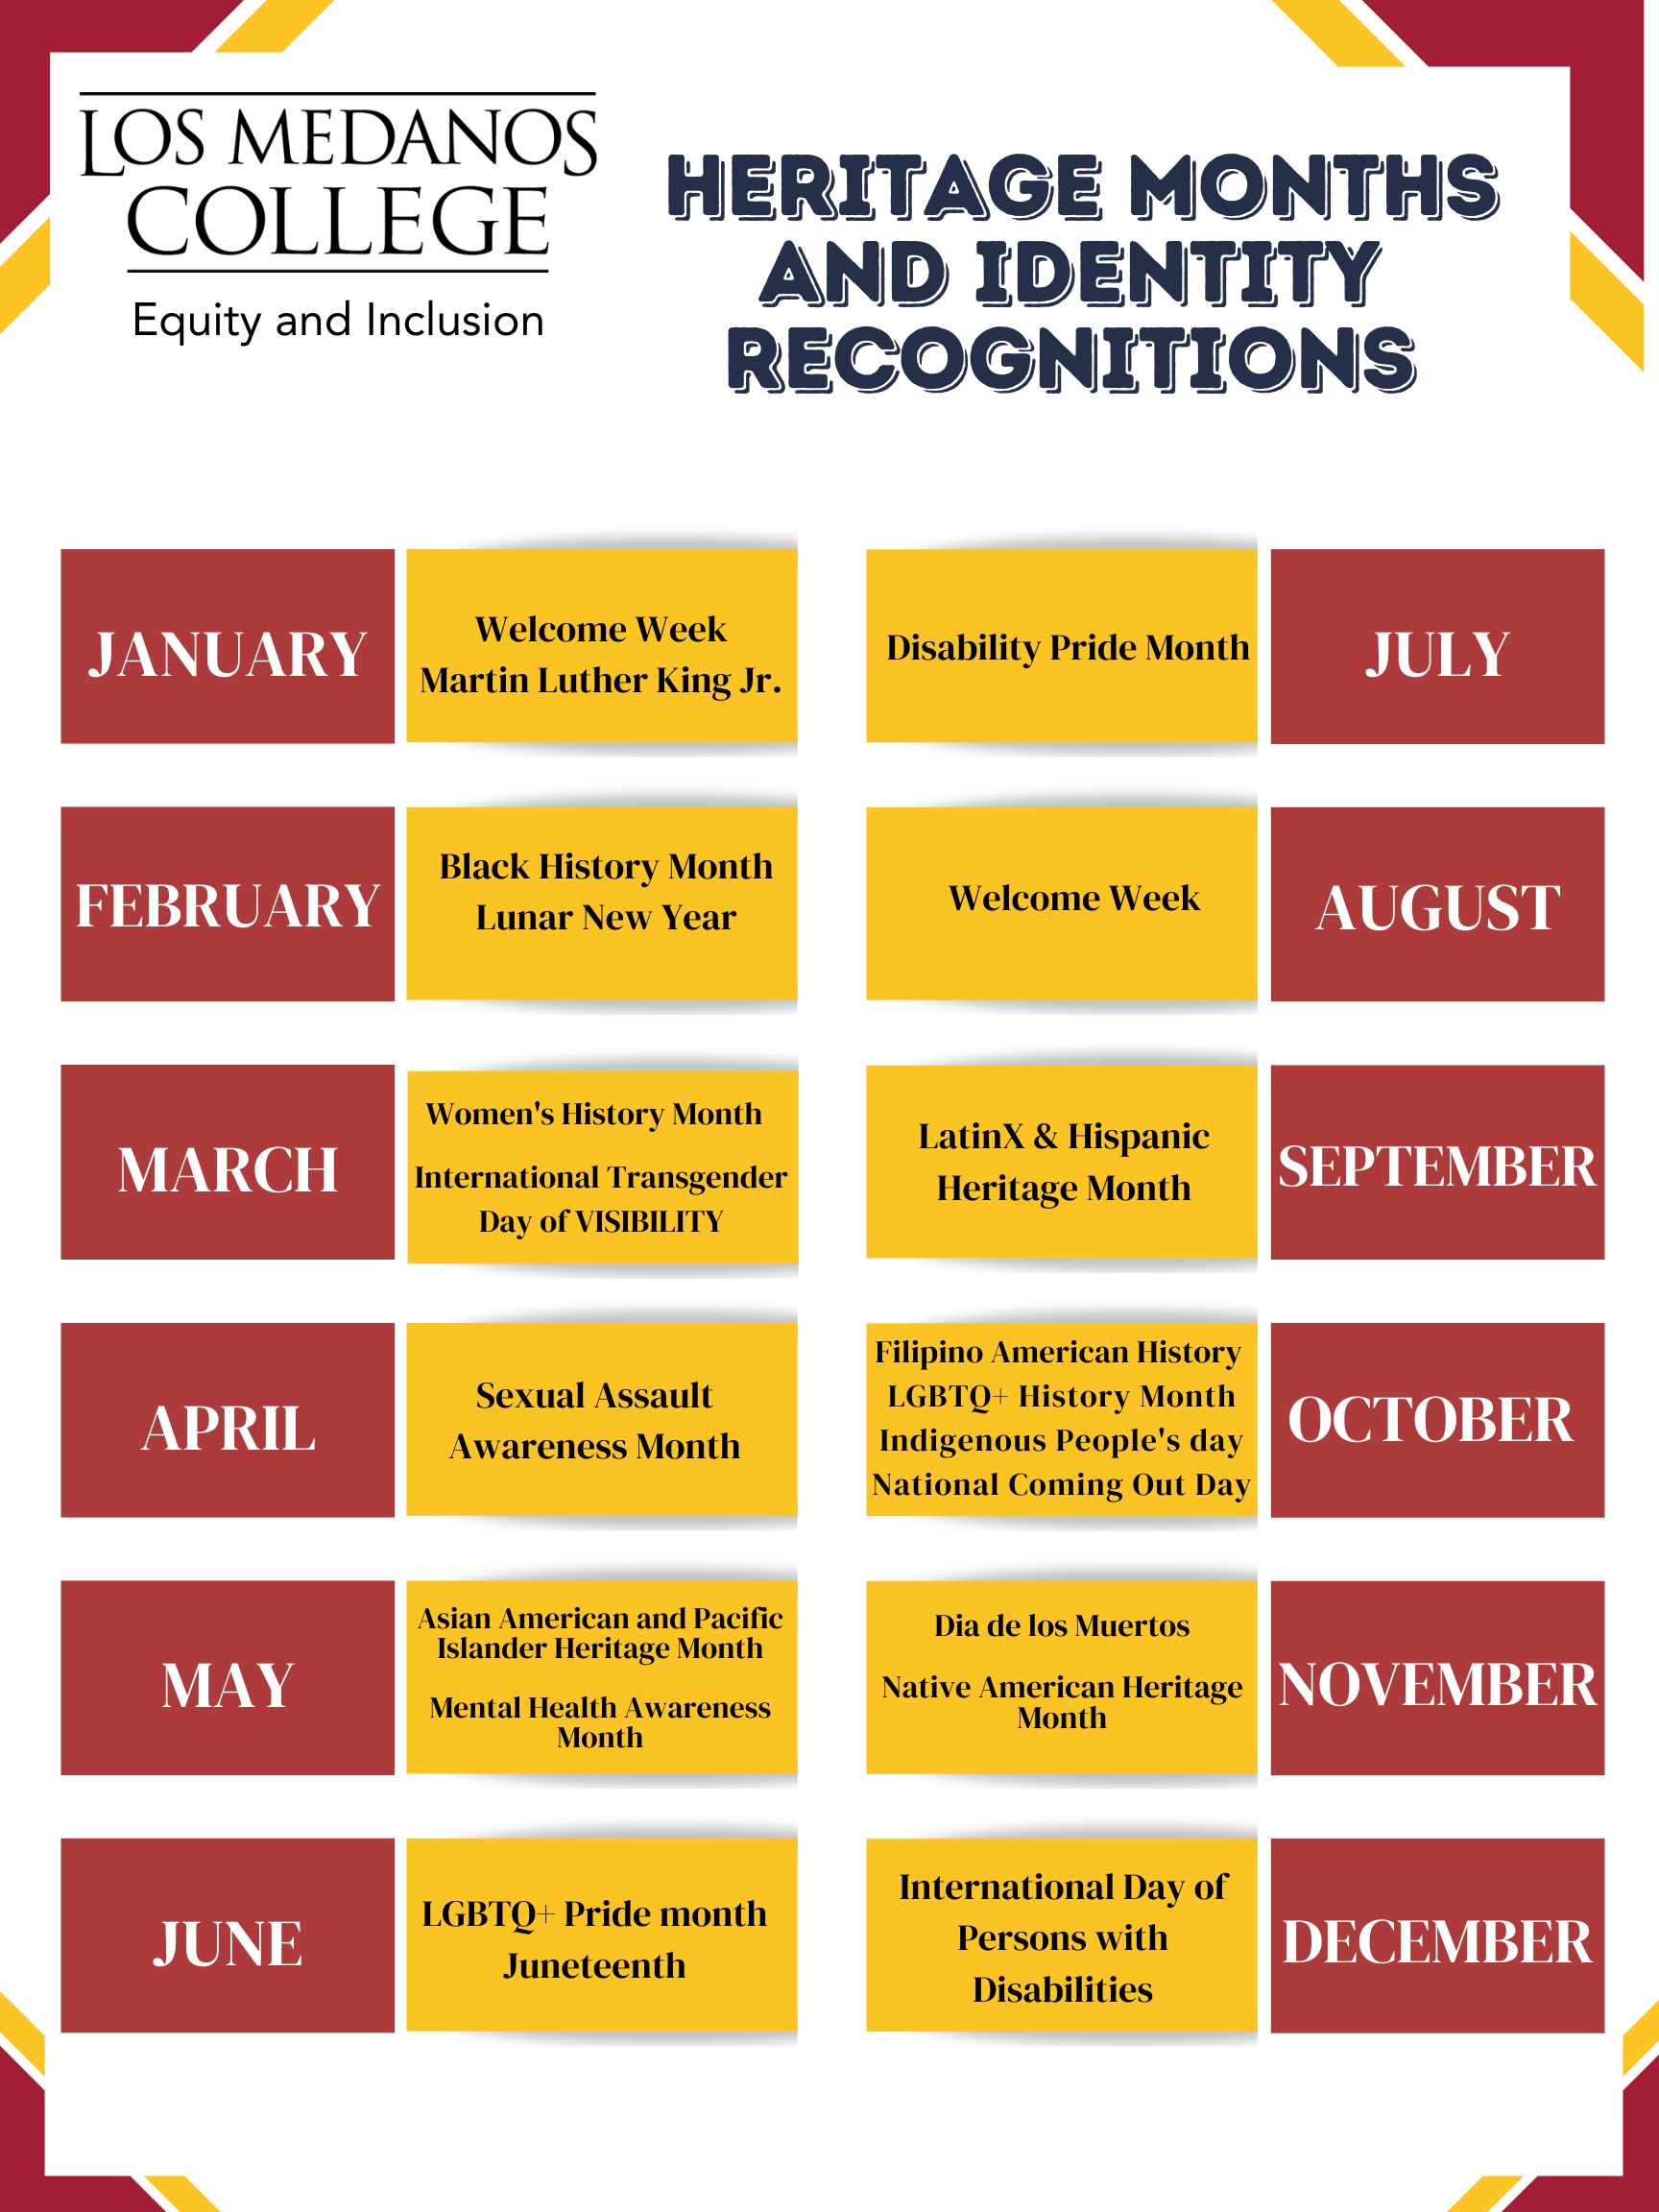 Heritage Months and Identity Recognitions